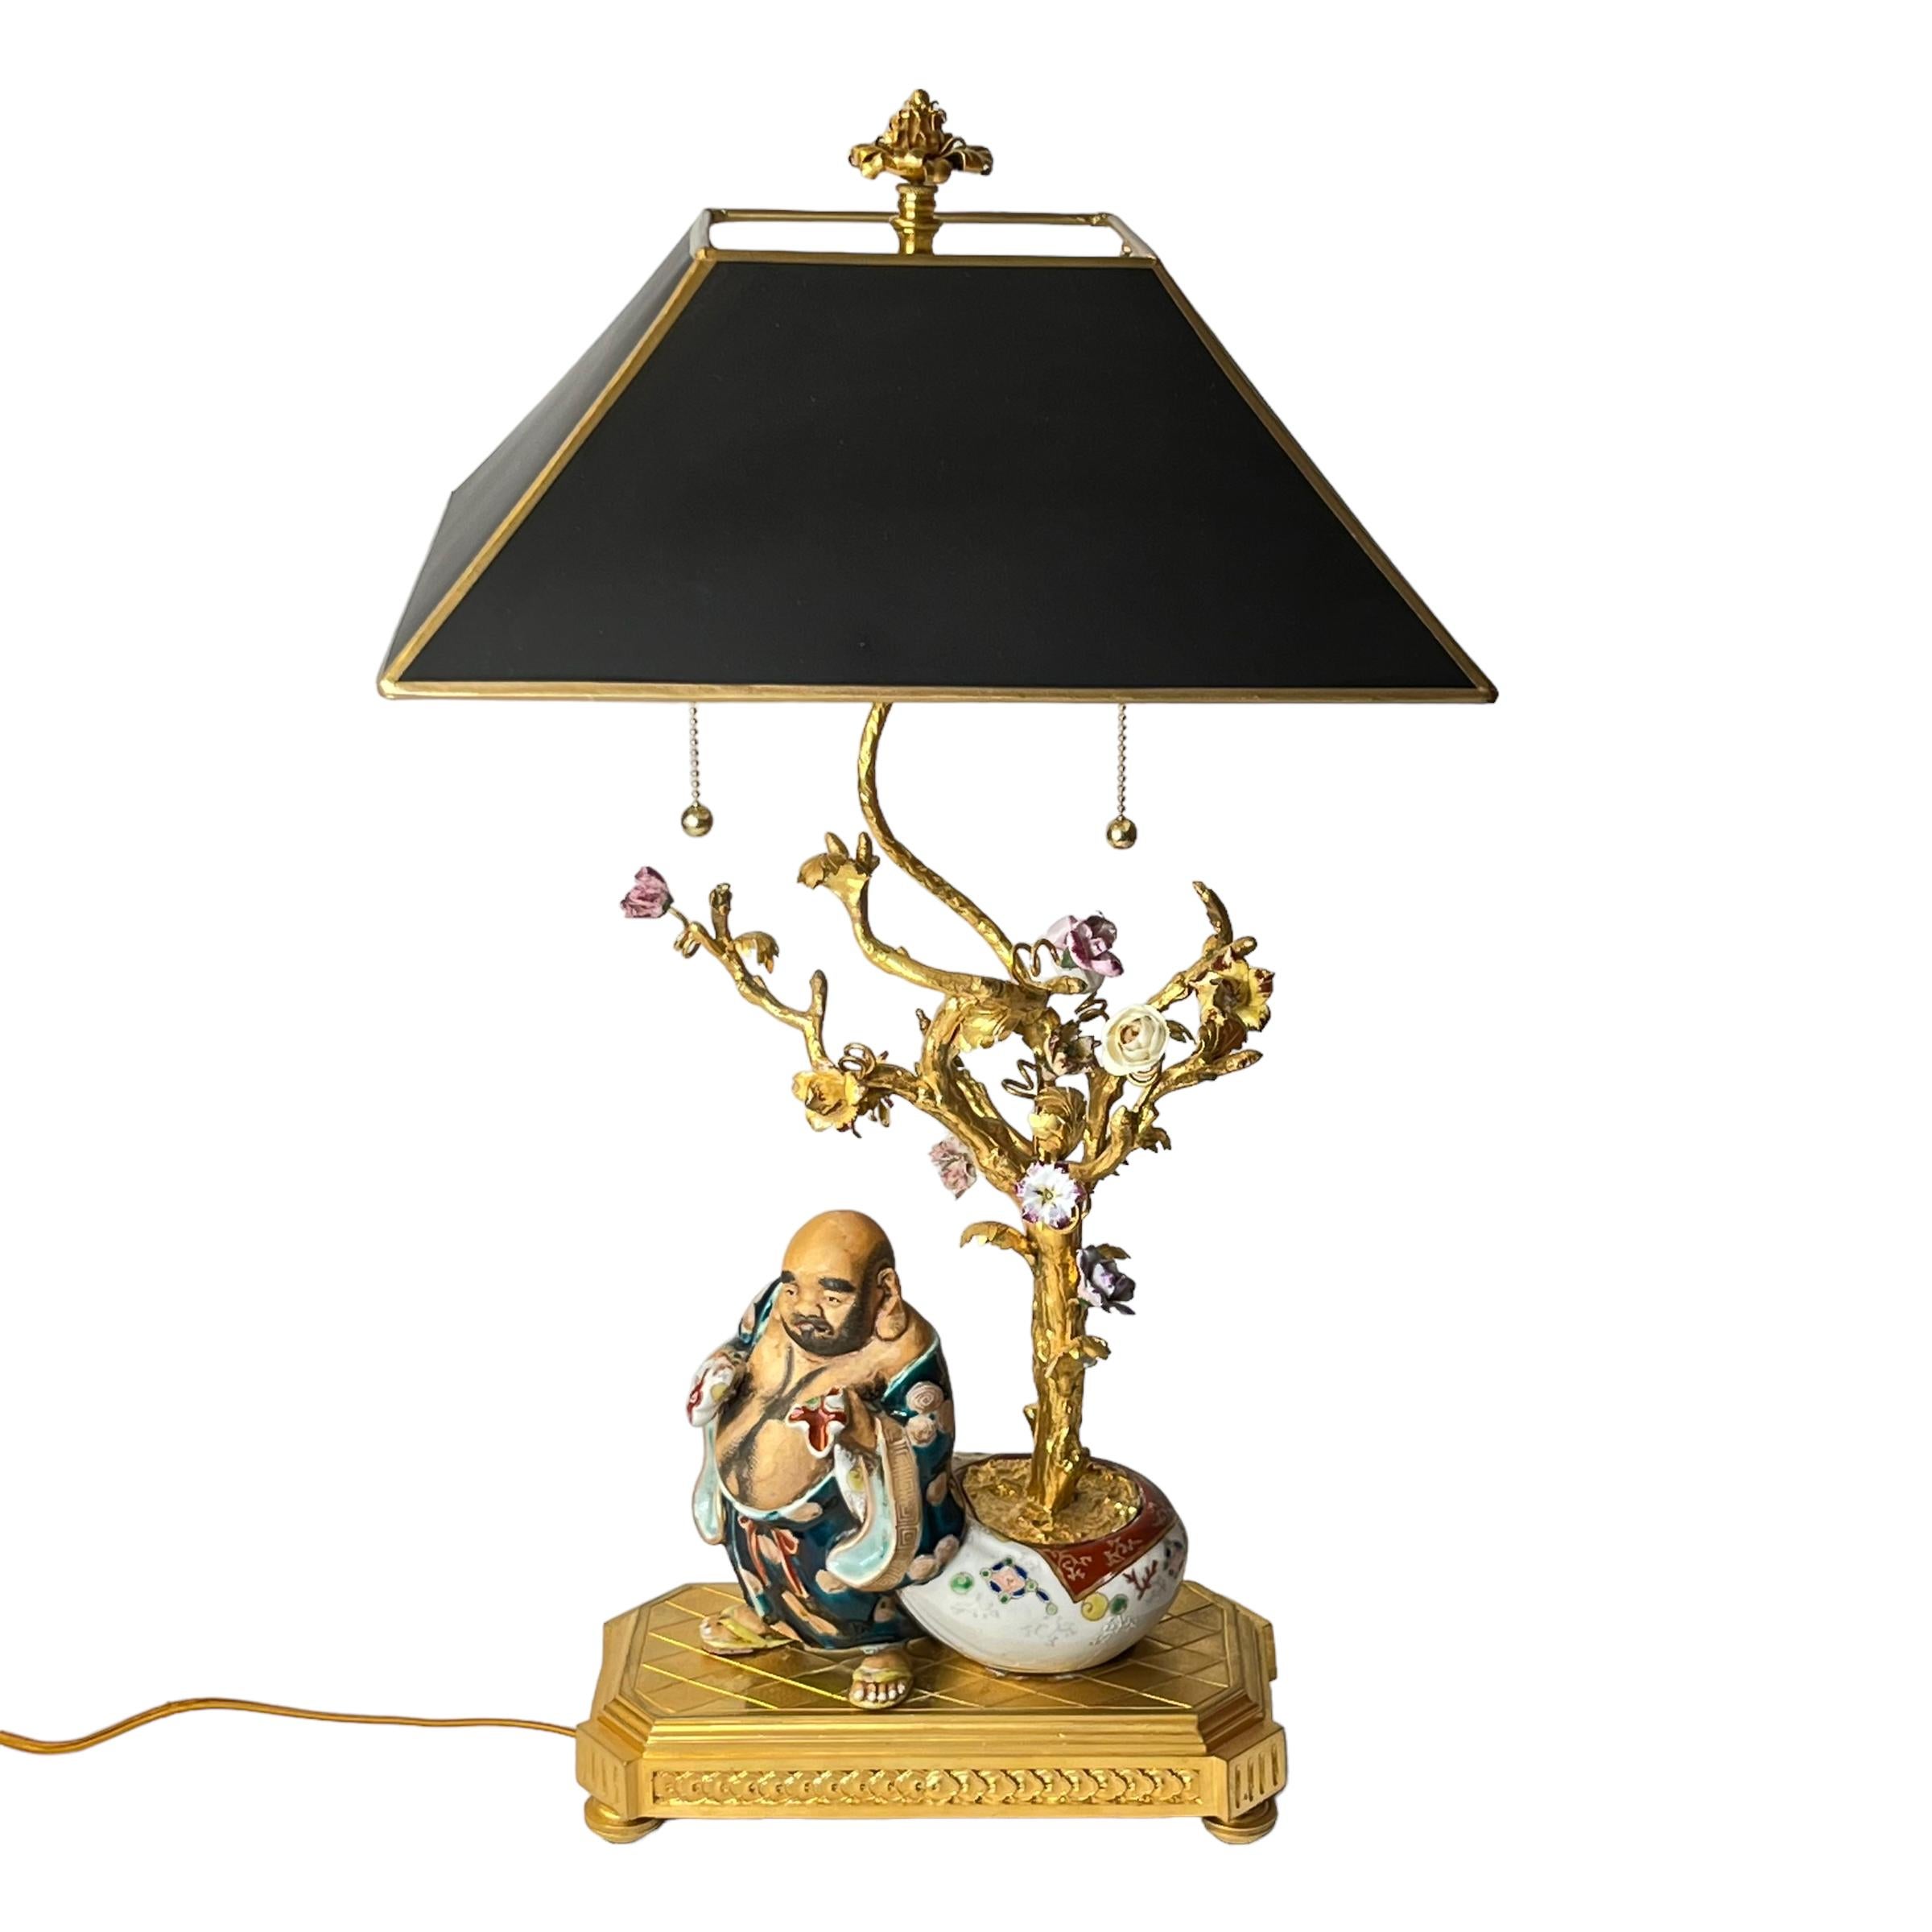 Our lovely table lamp features the polychrome decorated porcelain figure of the laughing Buddha standing beside a tree with porcelain flowers planted in porcelain jardiniere, and a finely cast and gilded bronze stand. Believed to be of French